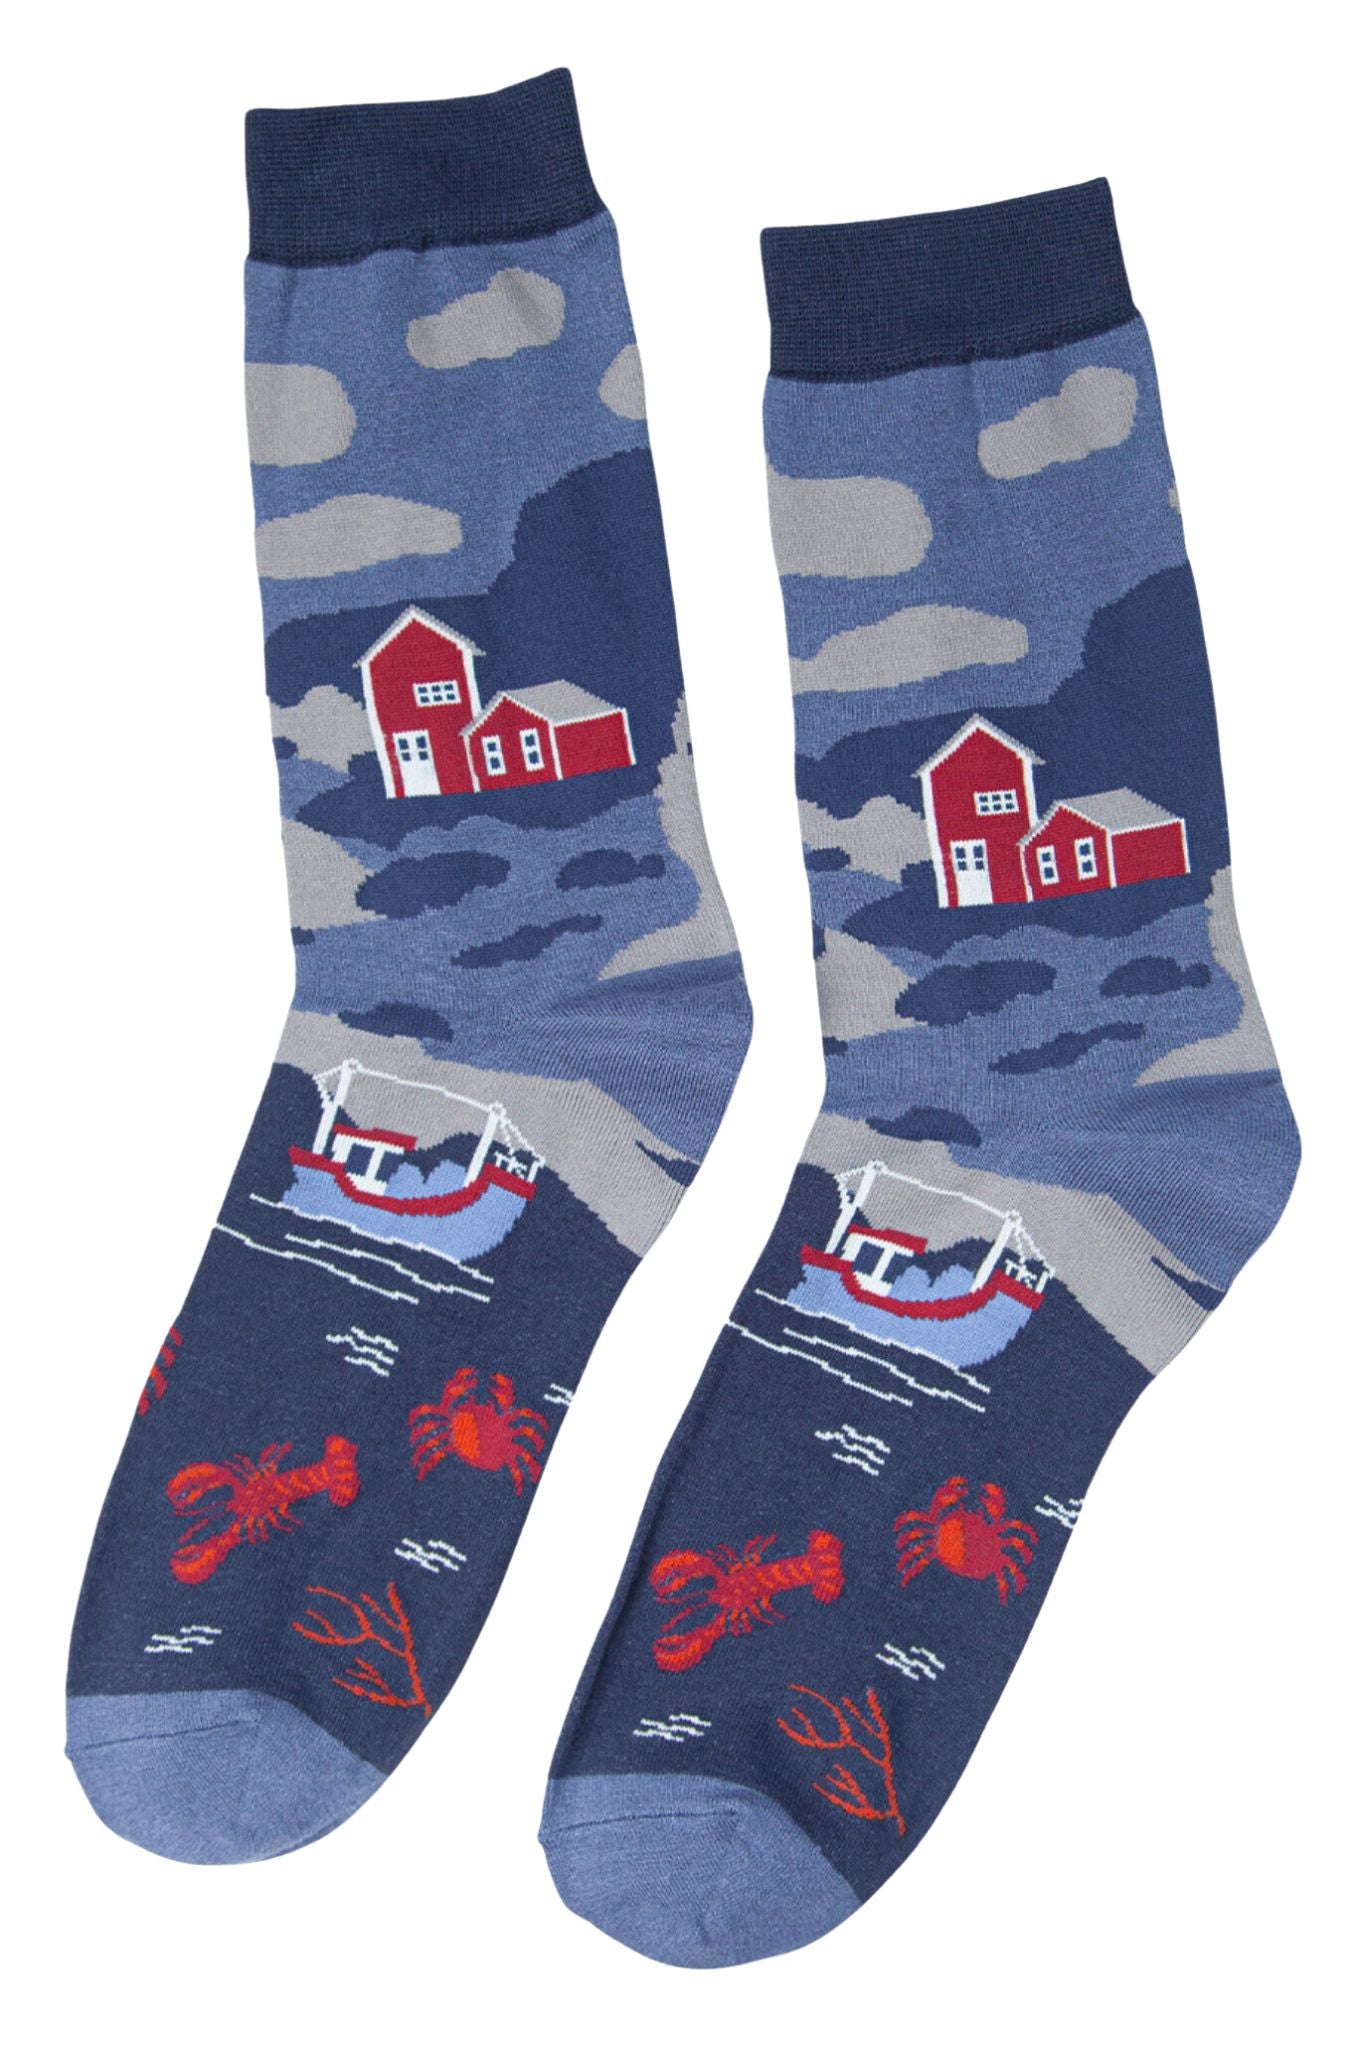 mens bamboo dress socks with lobsters, boats and an oceanscape scene